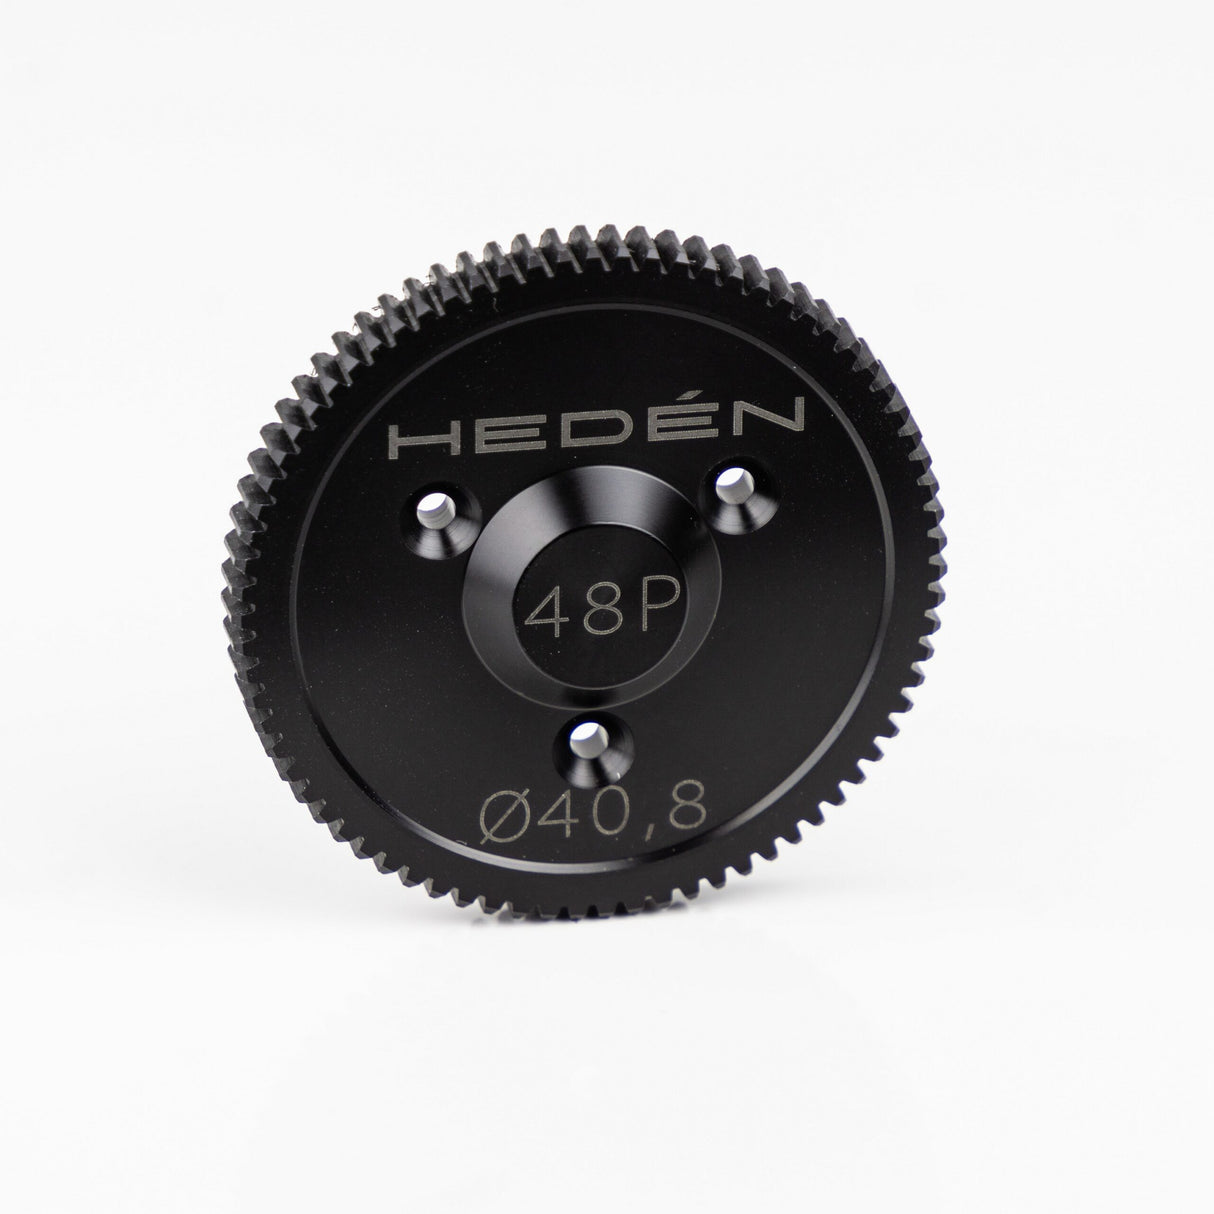 Heden 10055 Drive Gear P48 40.8mm MkII for M26T